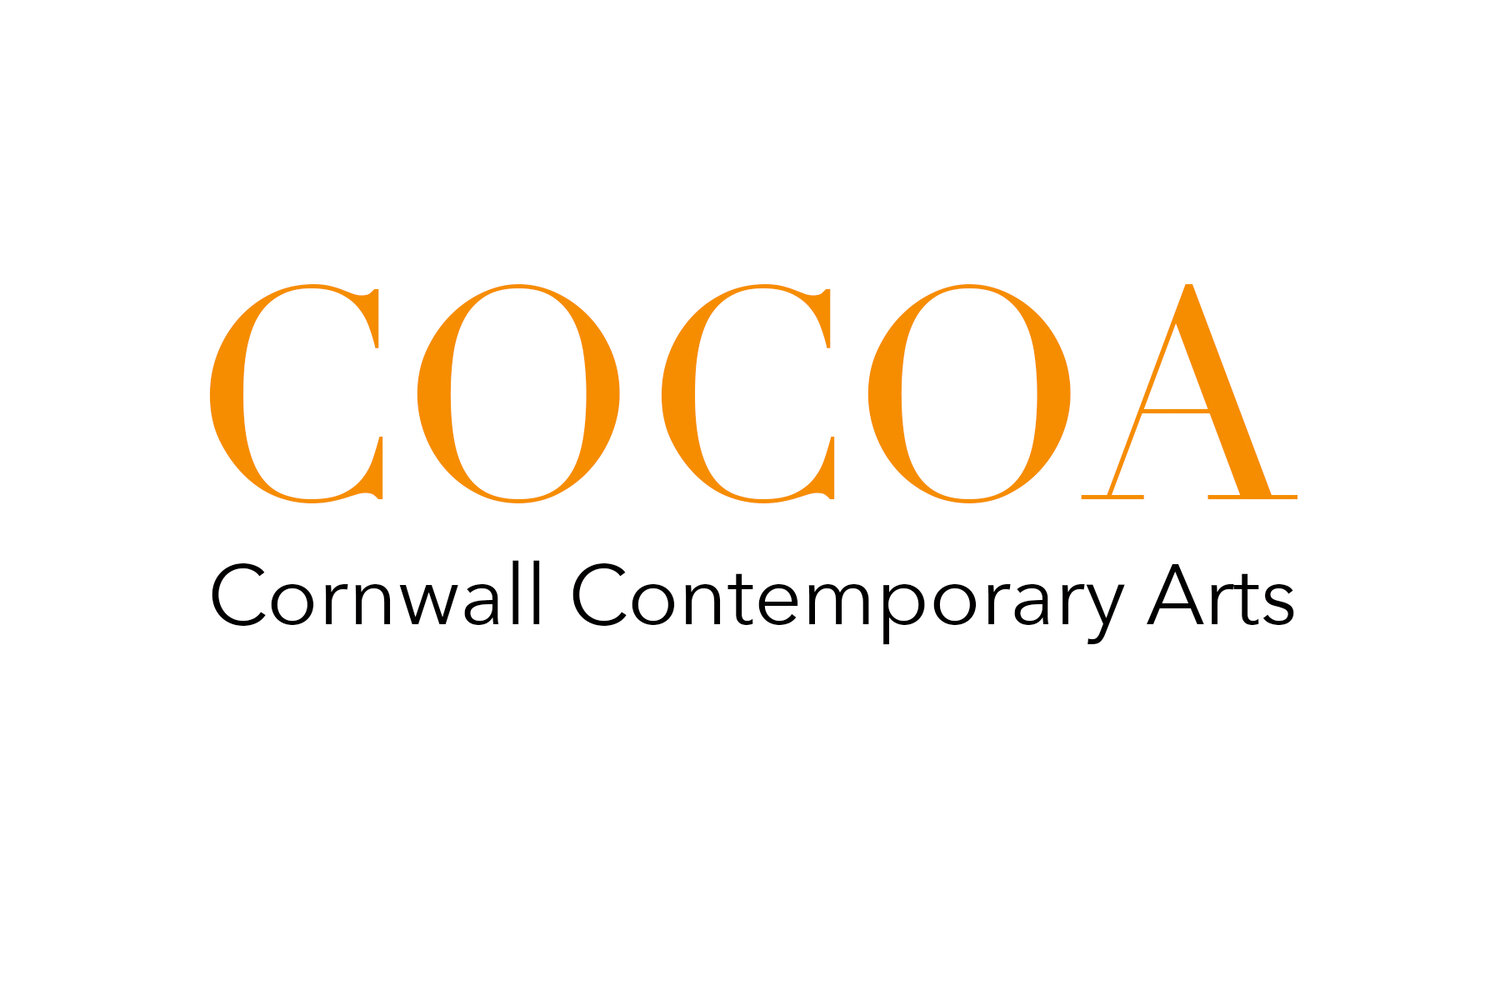 The Journal of Cornwall Contemporary Arts